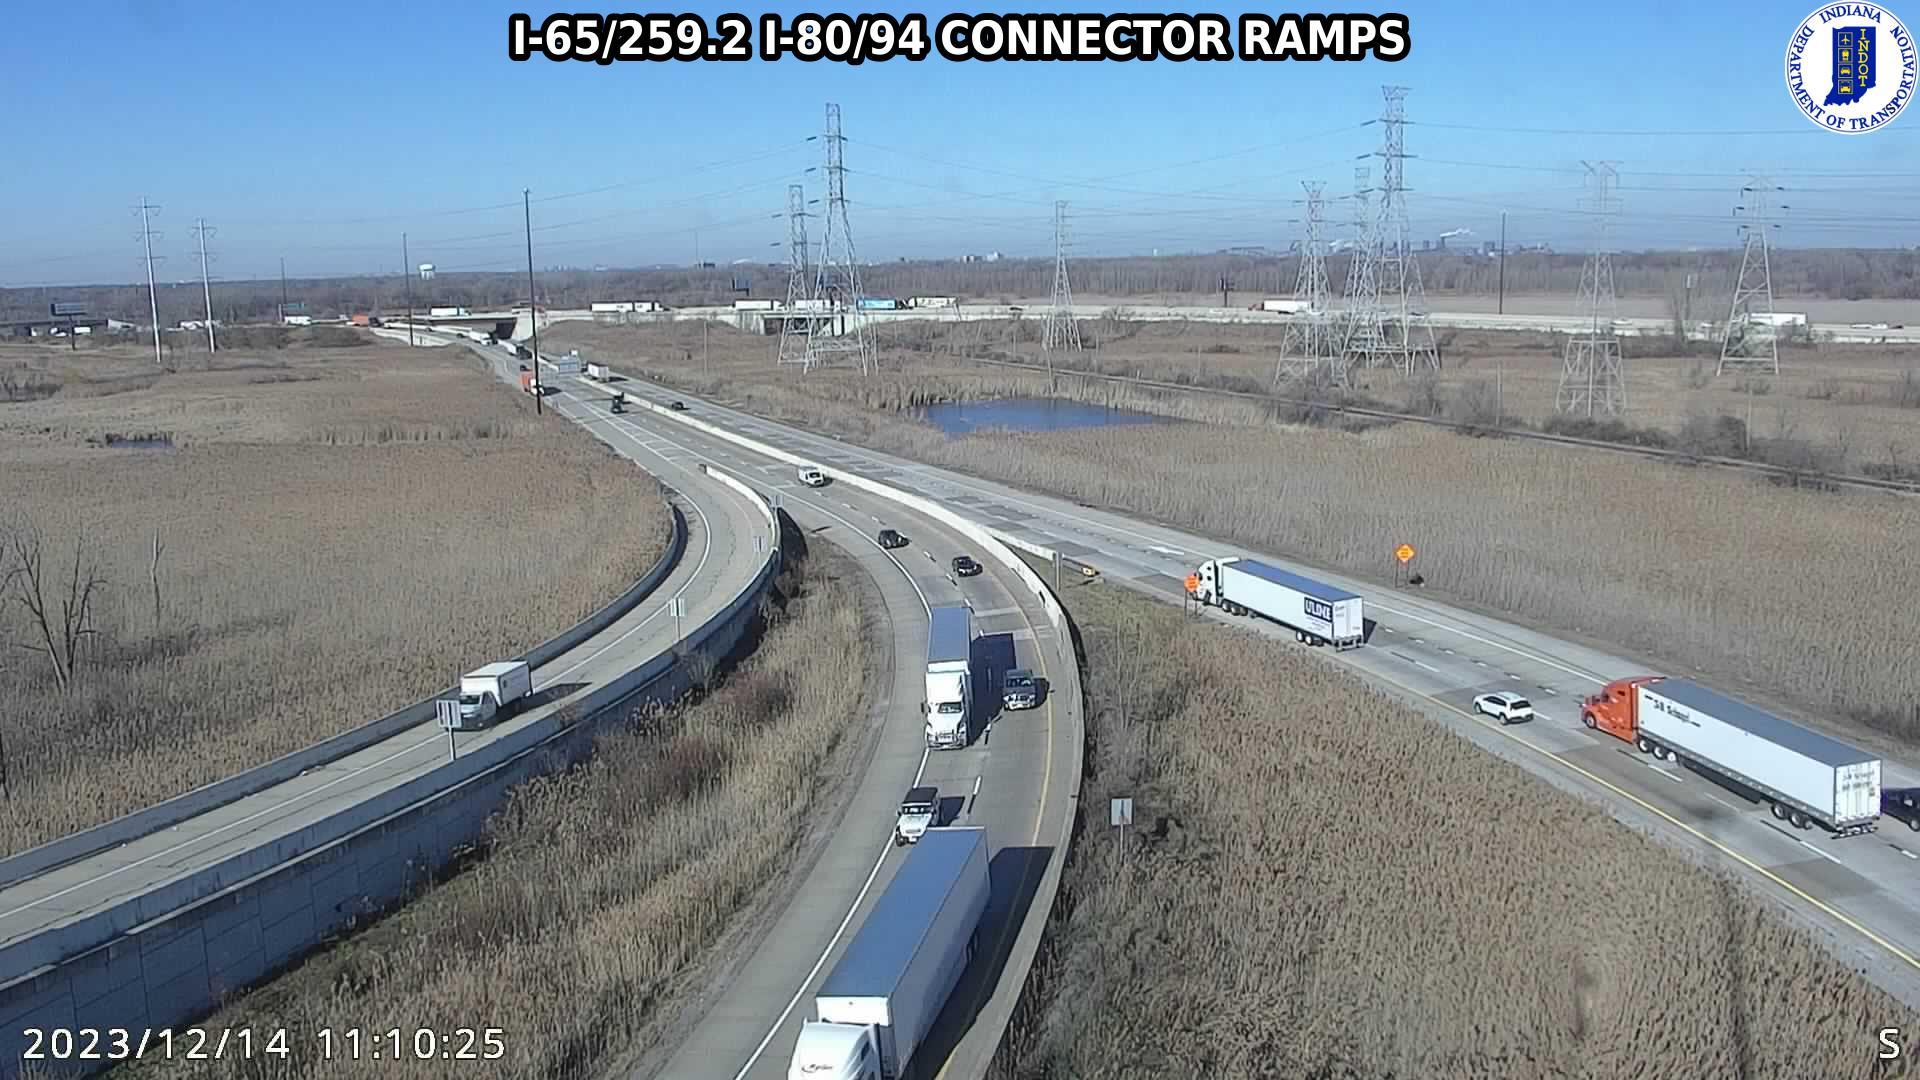 Traffic Cam Gary: I-65: I-65/259.2 I-80/94 CONNECTOR RAMPS : I-65/259.2 I-80/94 CONNECTOR RAMPS